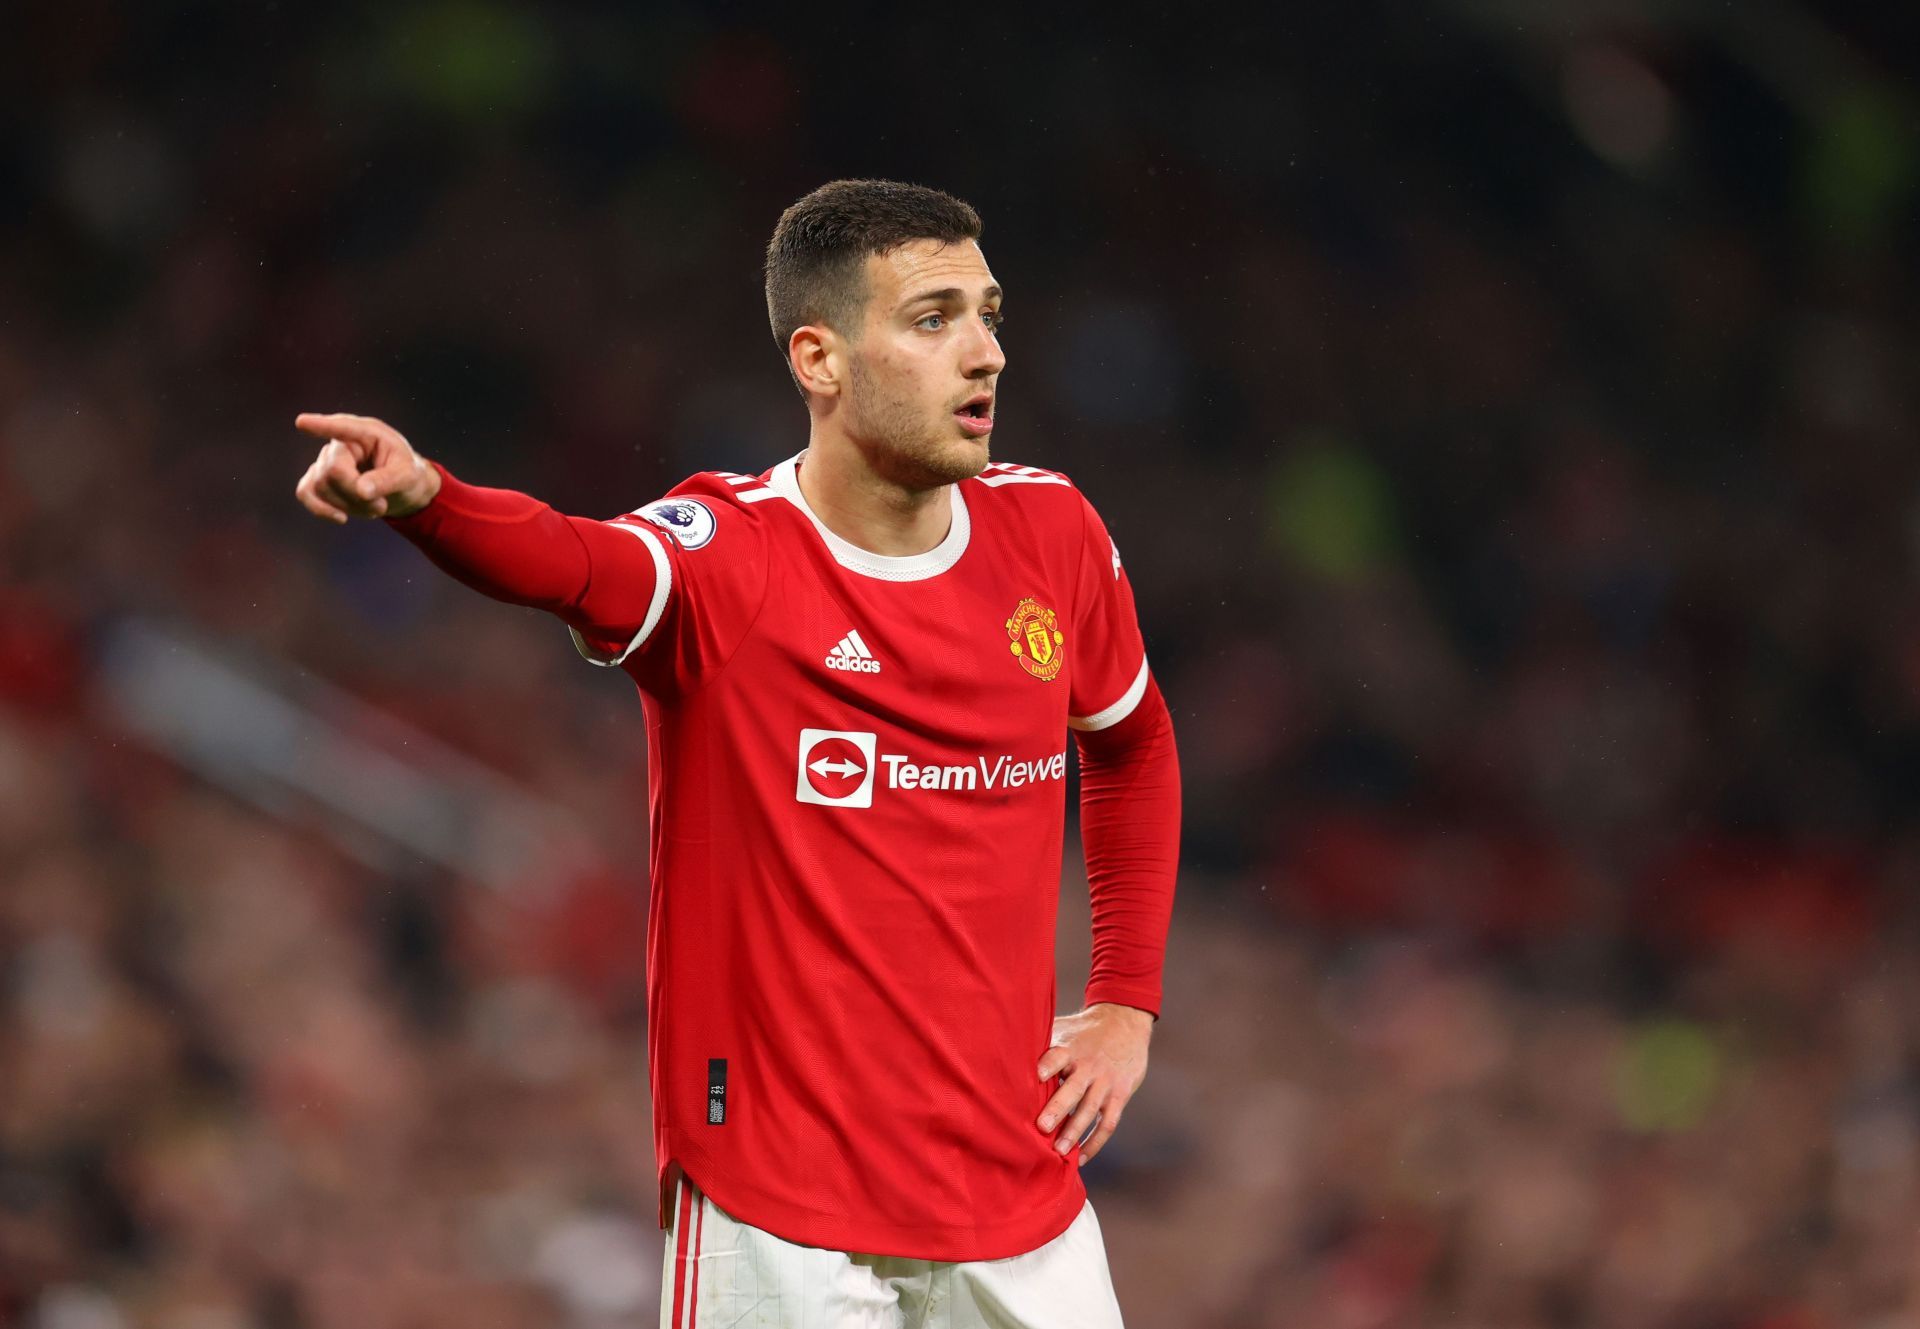 Diogo Dalot set to extend contract with Manchester United.